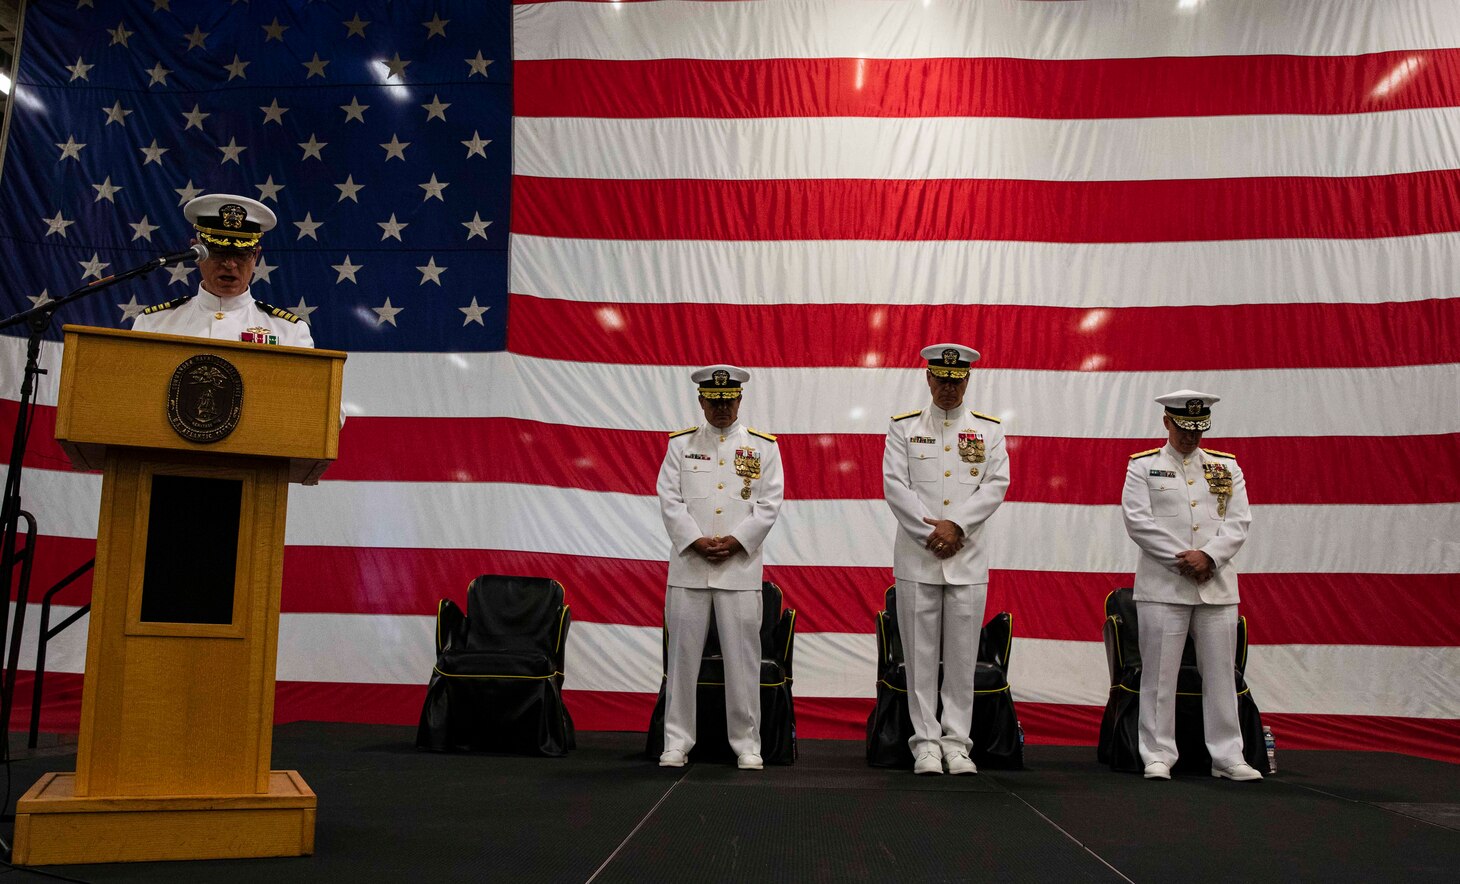 230602-N-KC543-1081 NORFOLK (June 2, 2023) Capt. David Thames, Naval Surface Force Atlantic force chaplain, delivers the benediction during the SURFLANT change of command ceremony aboard the amphibious assault ship USS Wasp (LHD 1), June 2, 2023. During the ceremony, Rear Adm. Joseph Cahill relieved Rear Adm. Brendan McLane as commander SURFLANT. (U.S. Navy photo by Mass Communication Specialist 1st Class Alora R. Blosch)